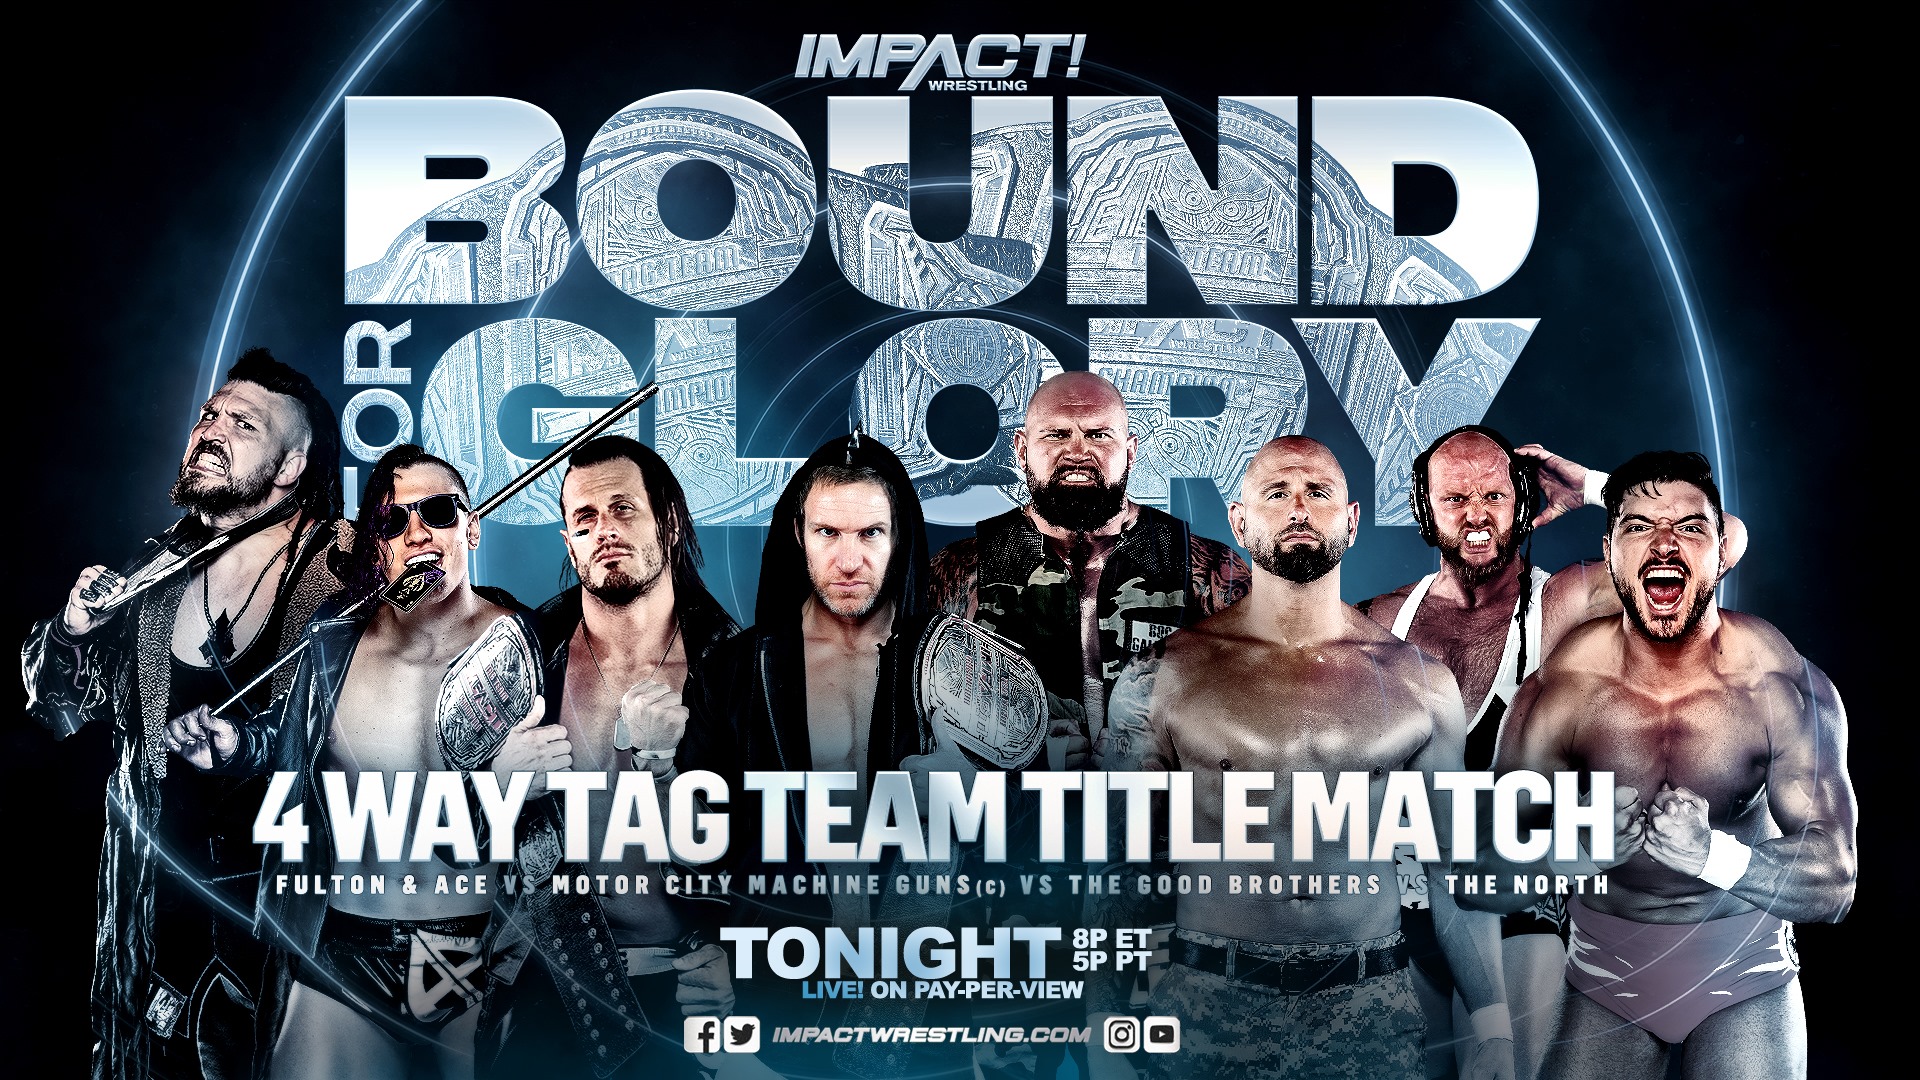 Bound For Glory 2020